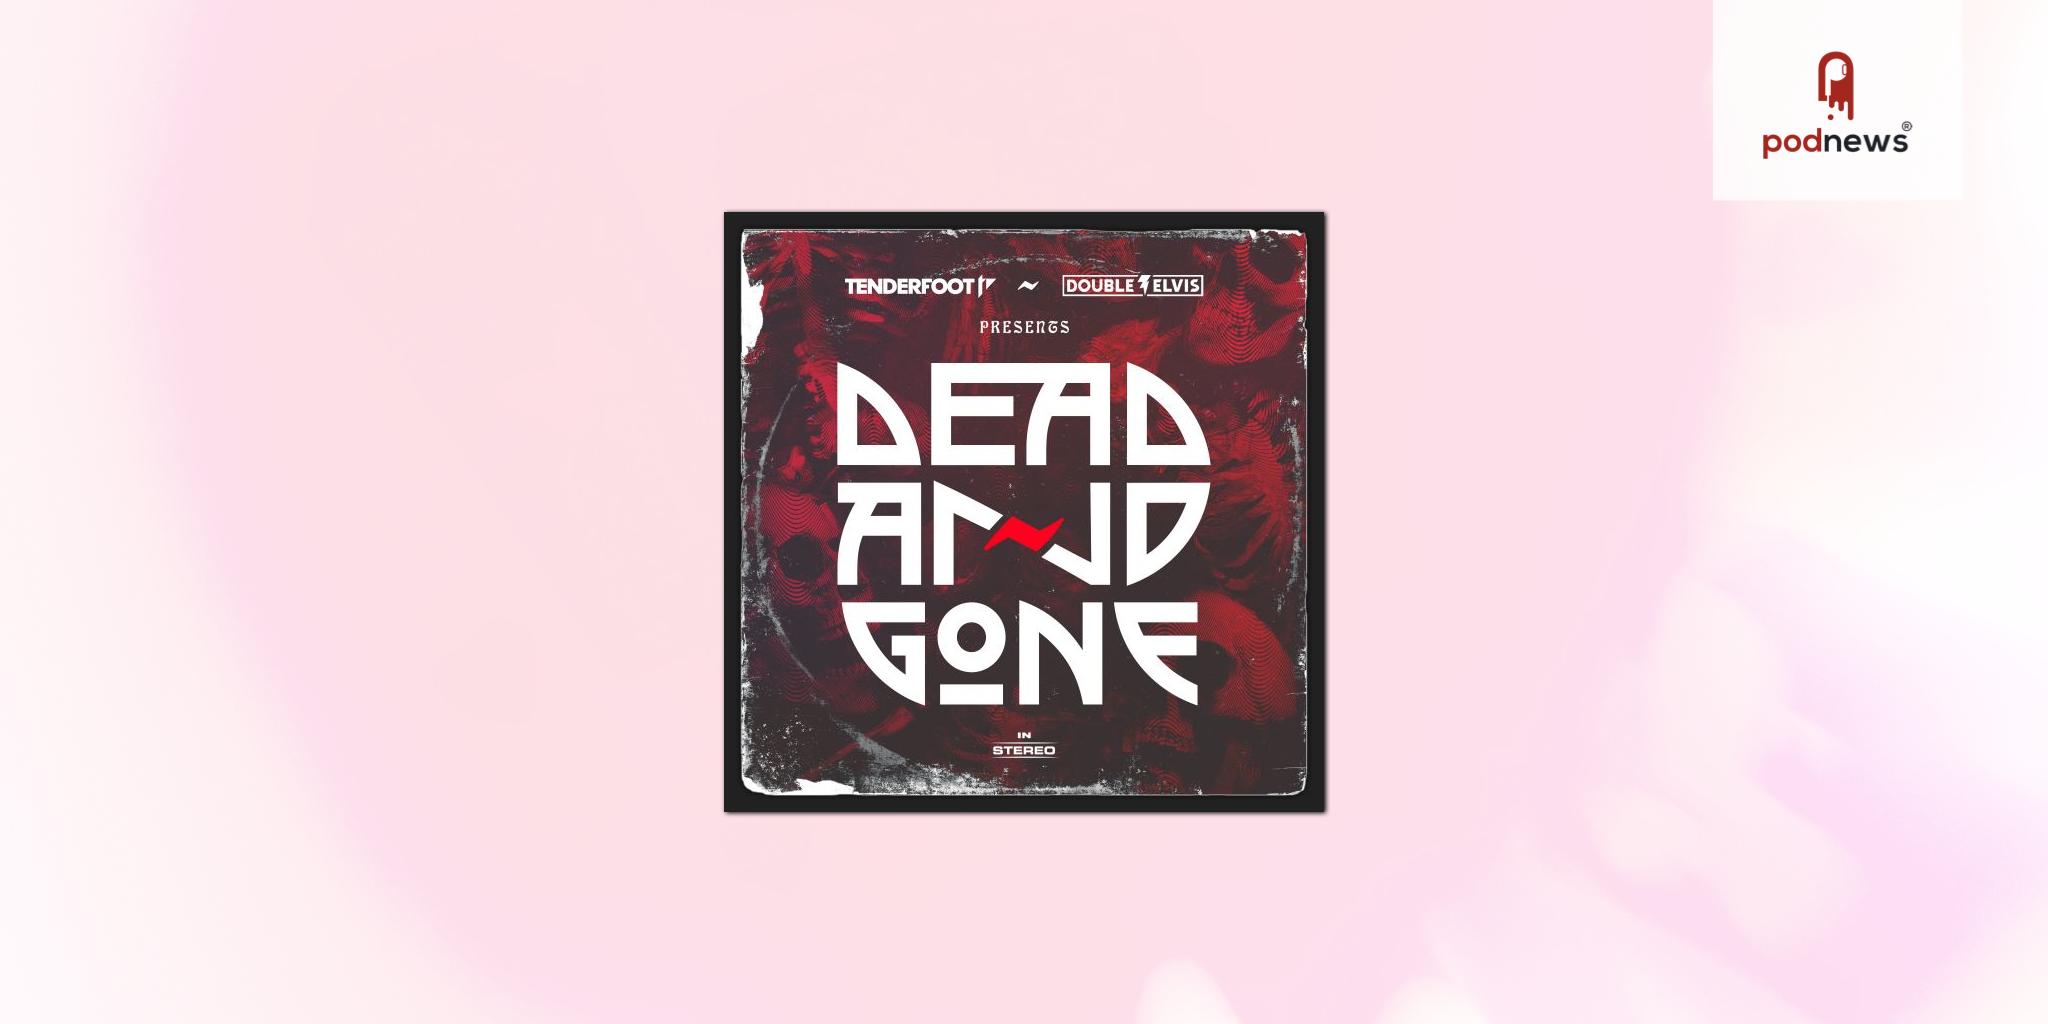 Tenderfoot TV and Double Elvis's Hit Podcast 'Dead and Gone' to be adapted for TV